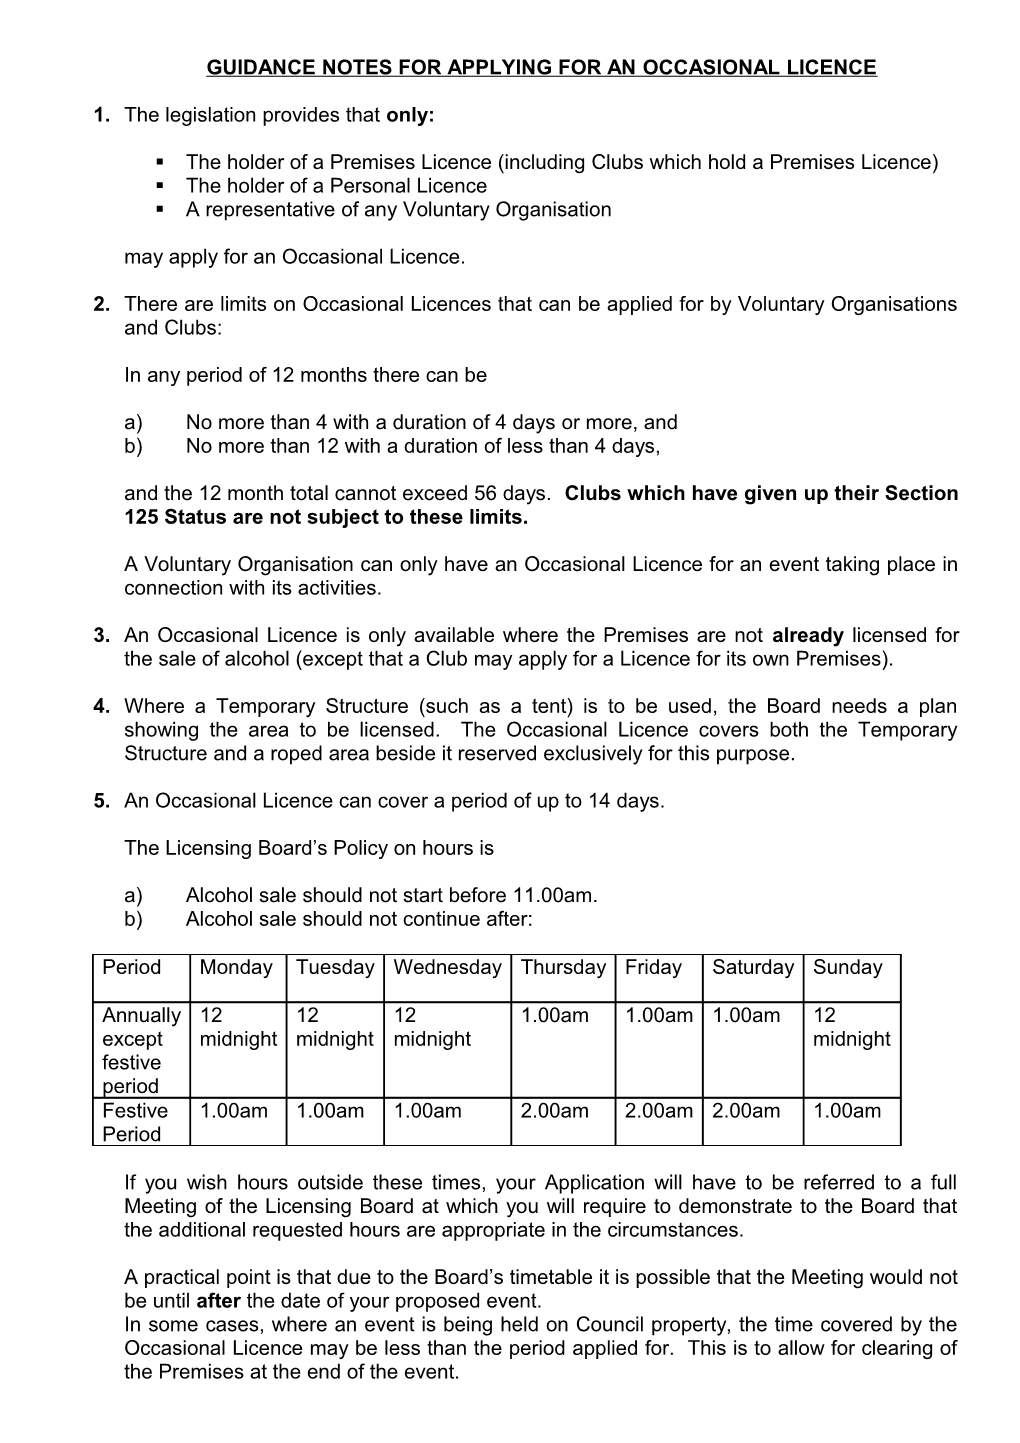 Guidance Notes for Applying for an Occasional Licence